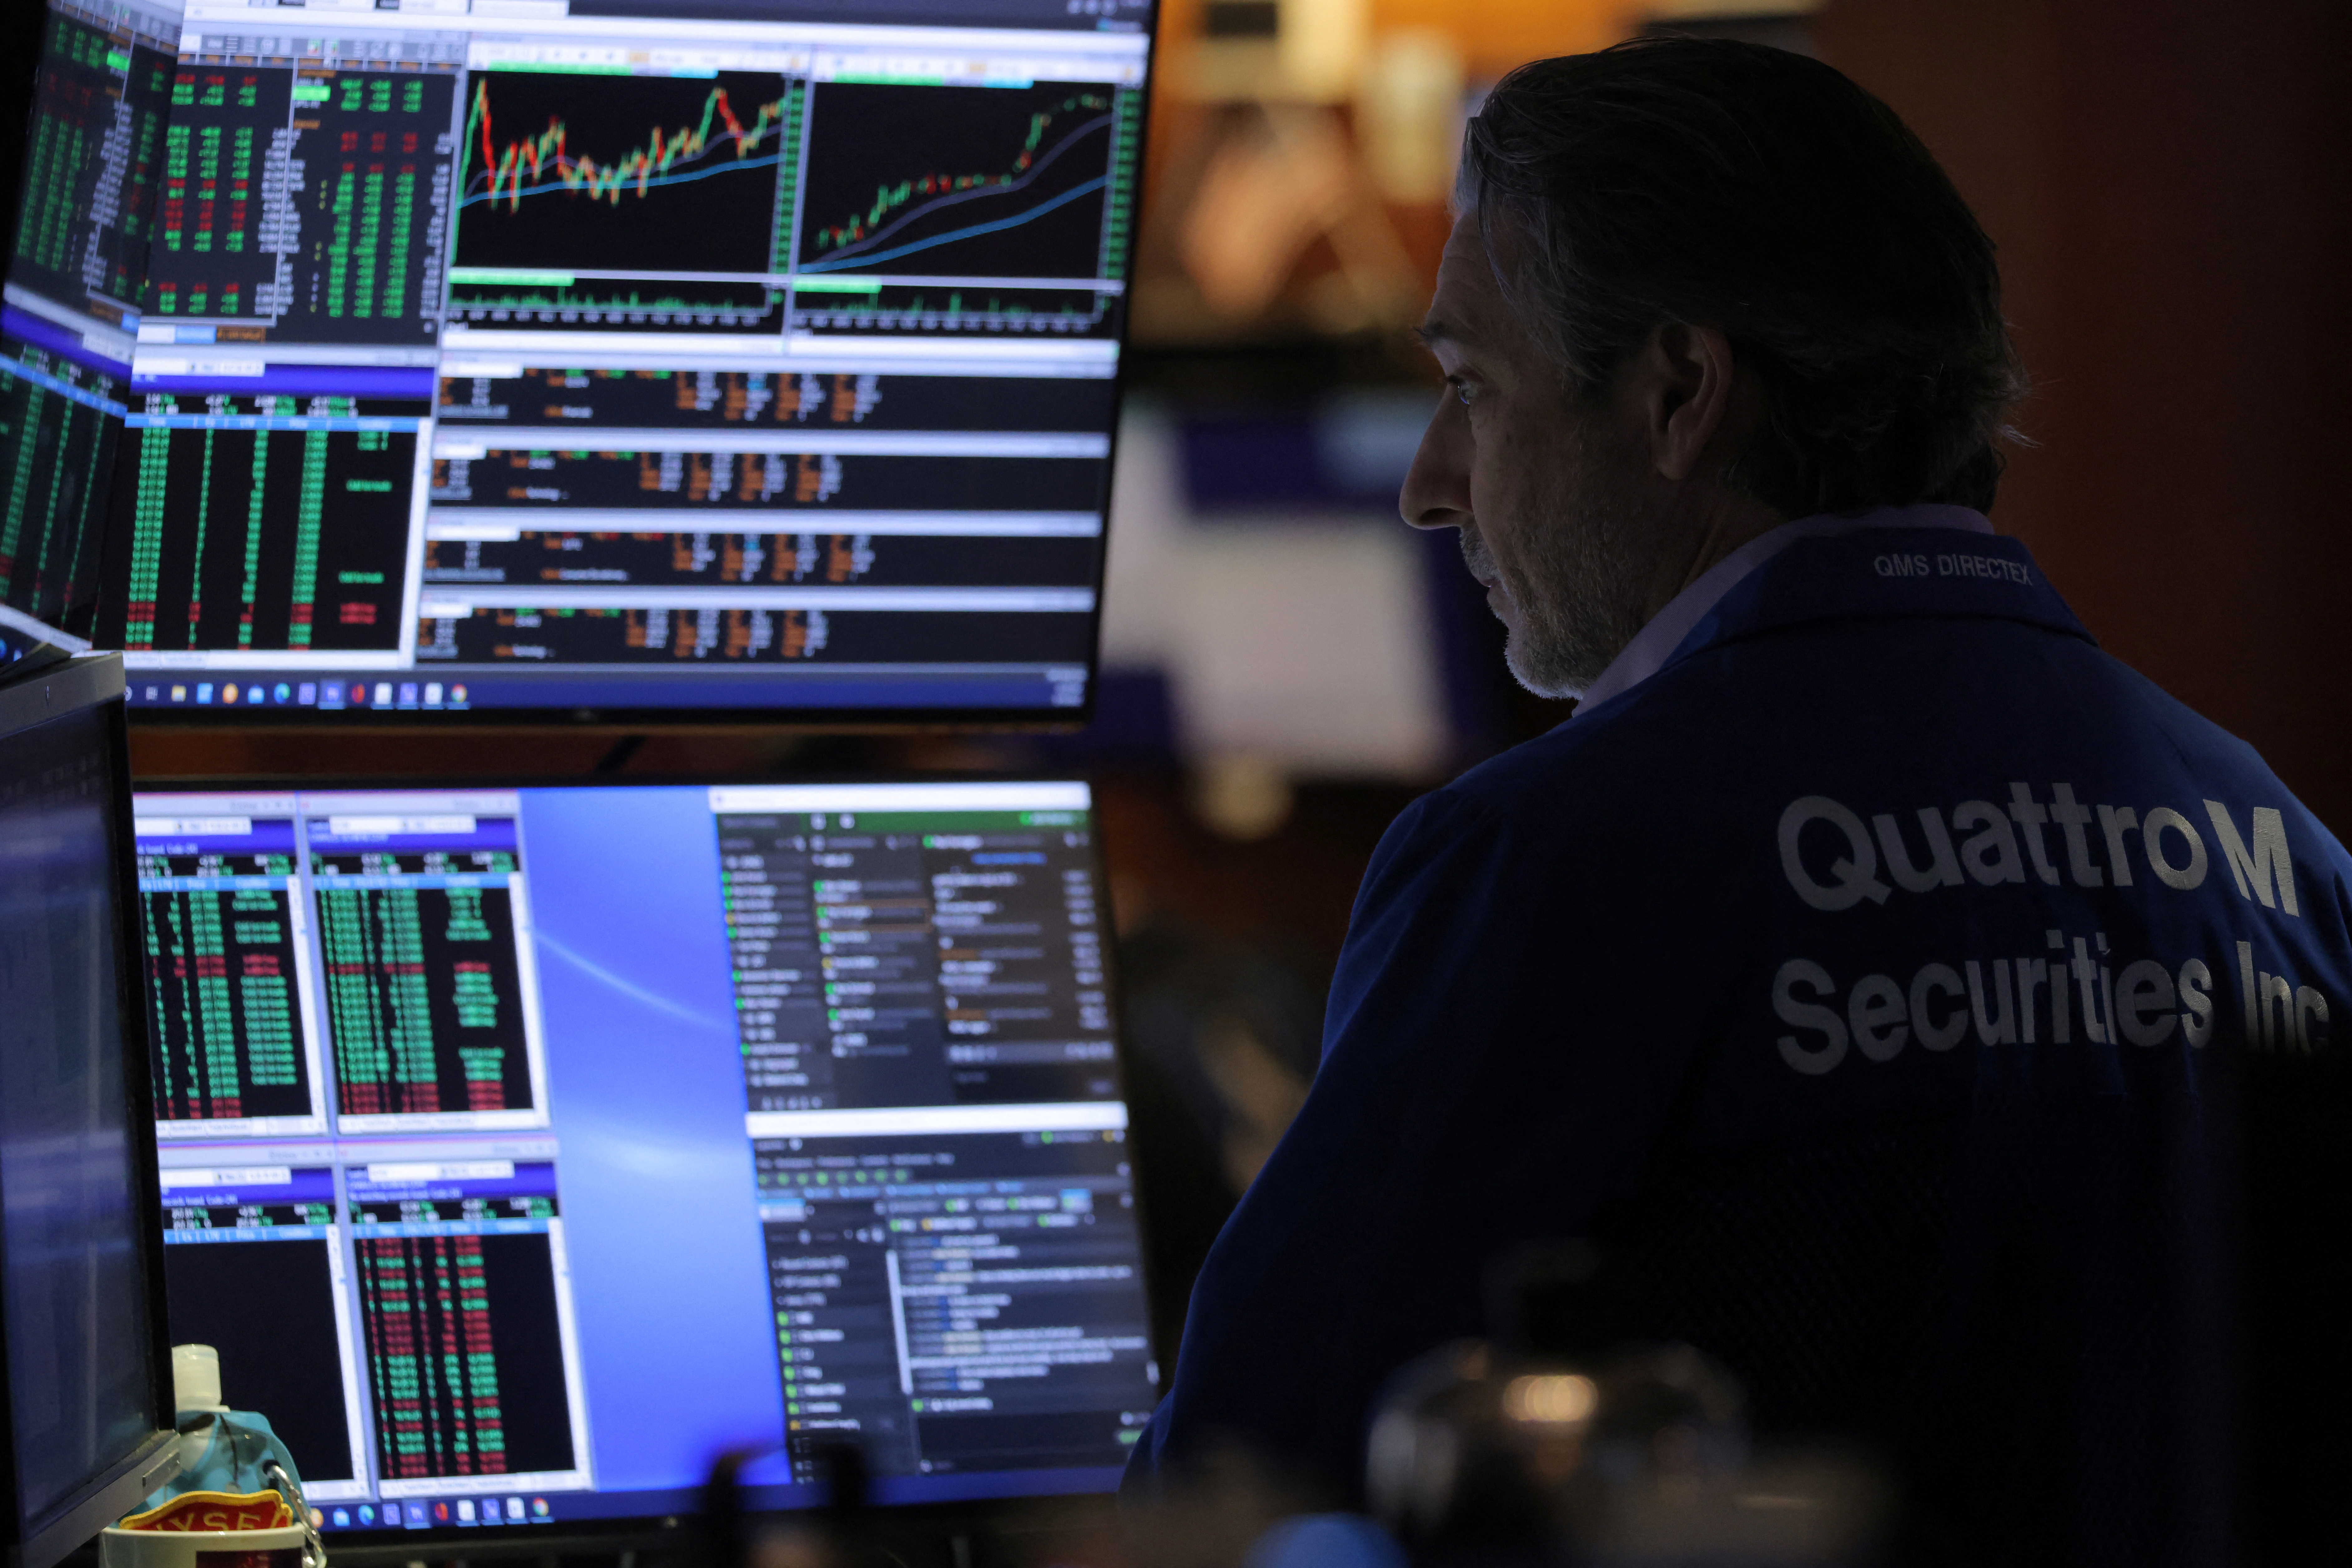 A trader works on the trading floor of the New York Stock Exchange (NYSE) in Manhattan, New York City